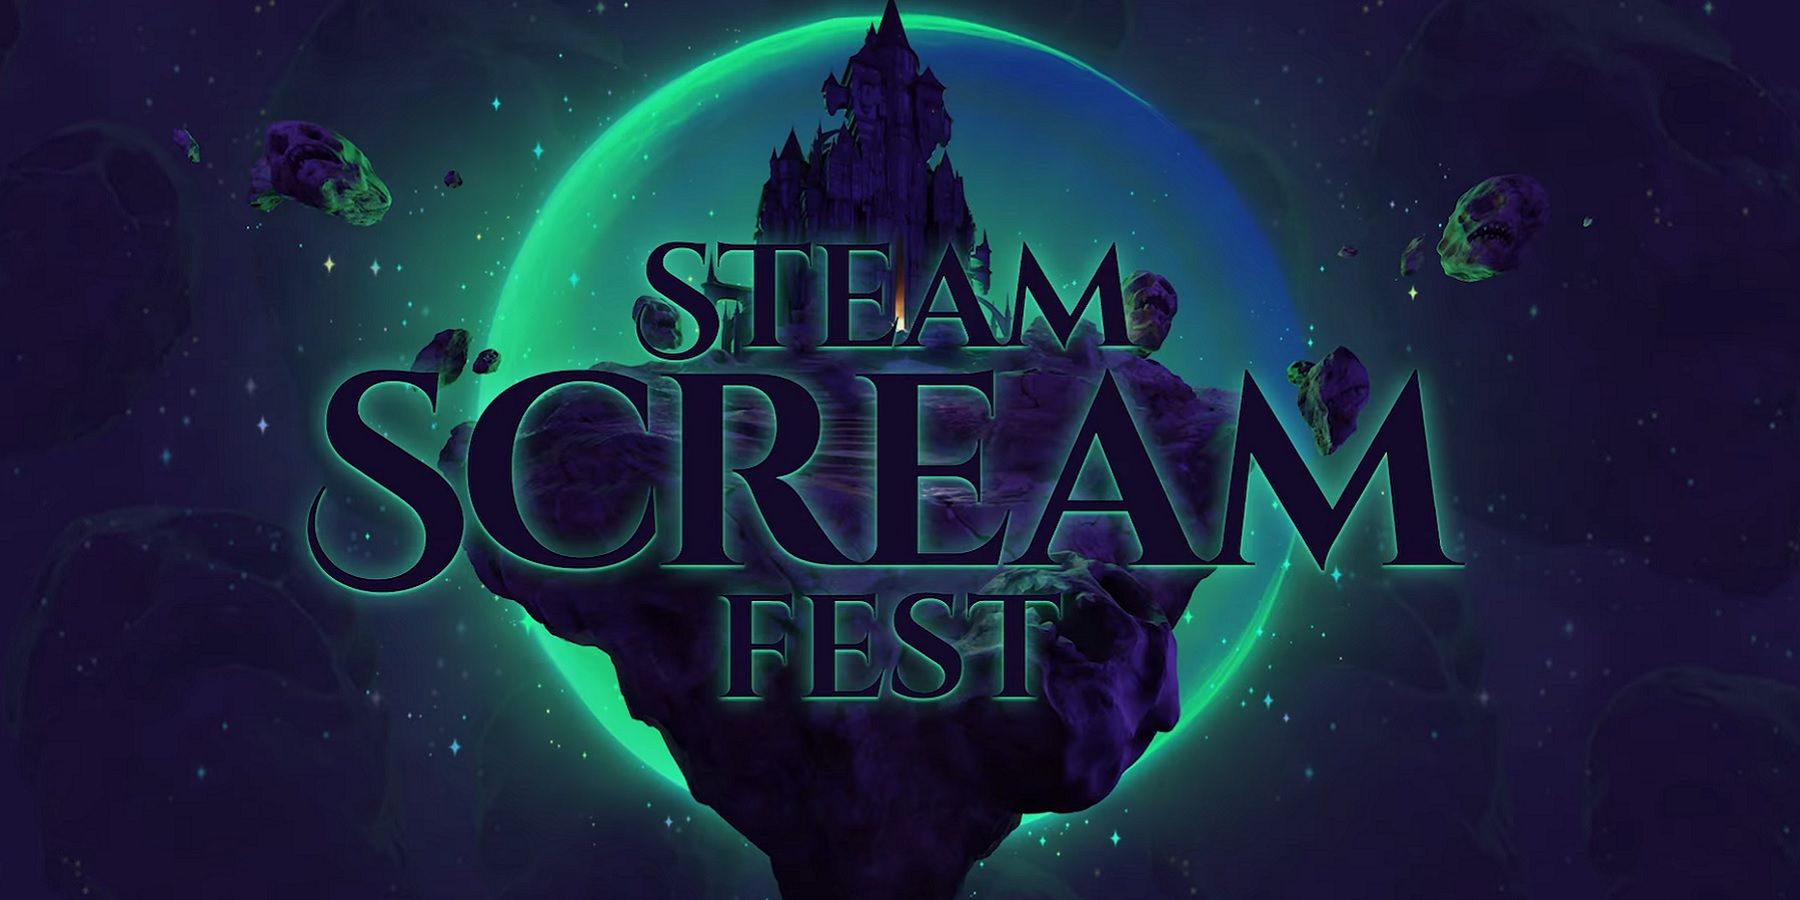 Image showing the Steam Scream Fest logo on a purple cosmic background.